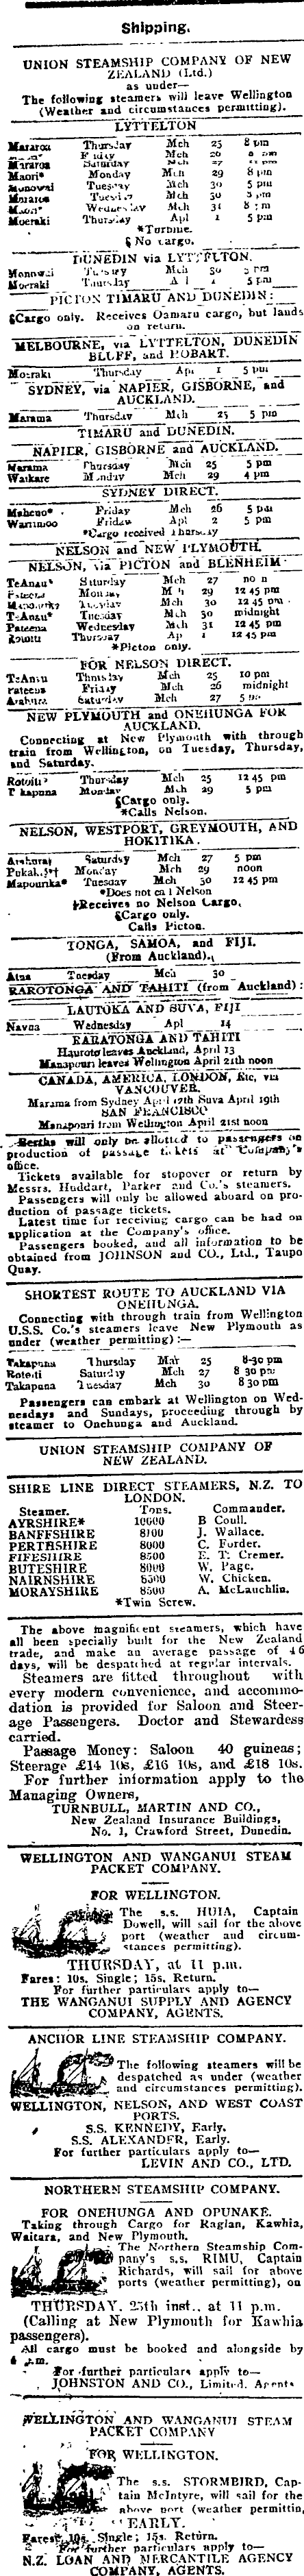 Papers Past Newspapers Wanganui Herald 24 March 1909 Page 1 Advertisements Column 1